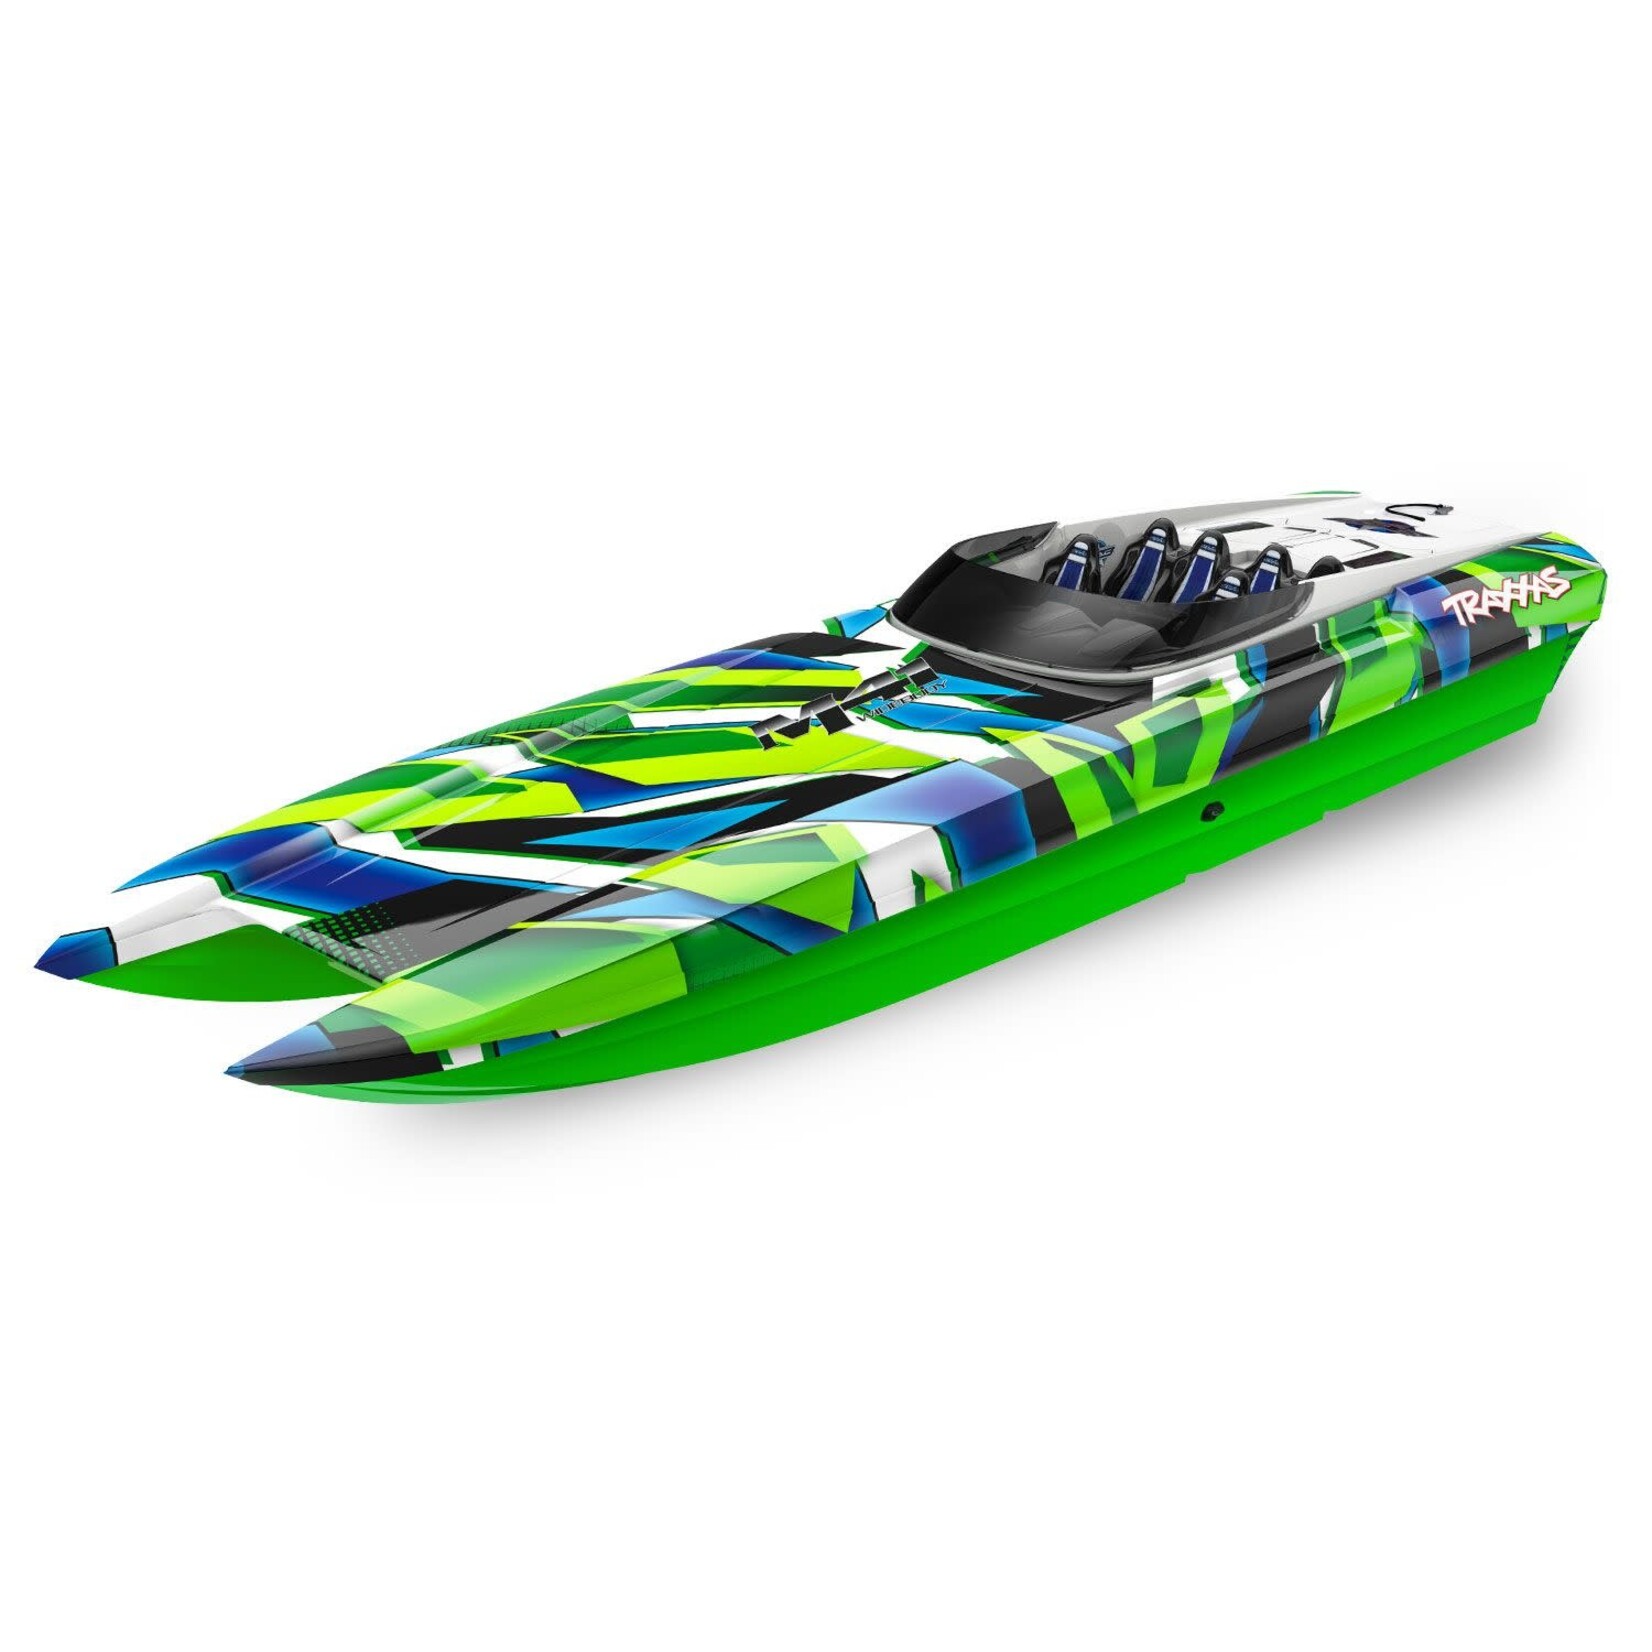 Traxxas 57046-4-GRNR DCB M41 Widebody:  Brushless 40' Race Boat with TQi™ Traxxas Link™ Enabled 2.4GHz Radio System & Traxxas Stability Management (TSM)®